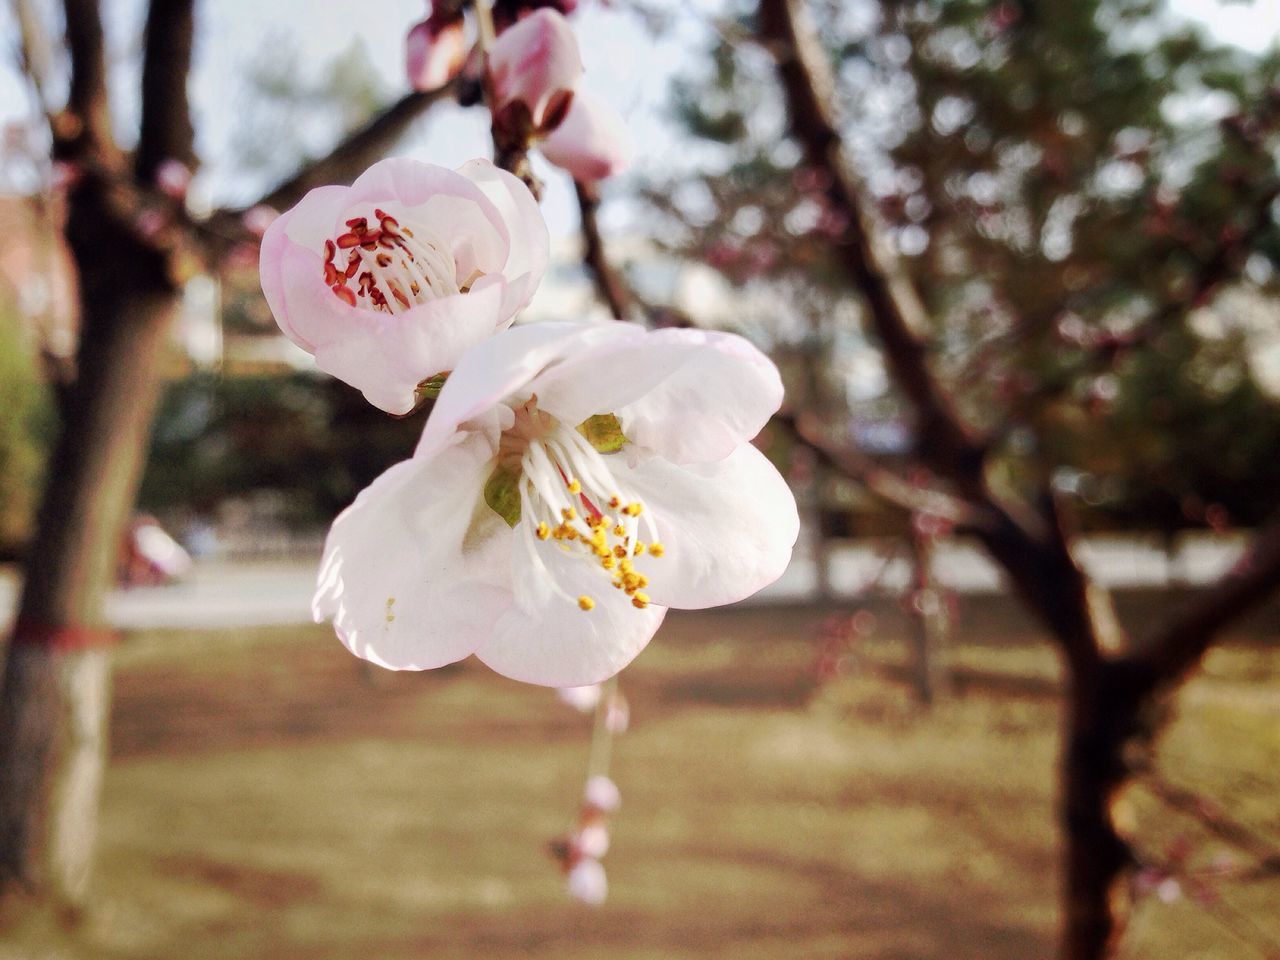 flower, petal, freshness, fragility, focus on foreground, flower head, growth, white color, close-up, beauty in nature, cherry blossom, tree, nature, blossom, blooming, branch, in bloom, stamen, apple tree, springtime